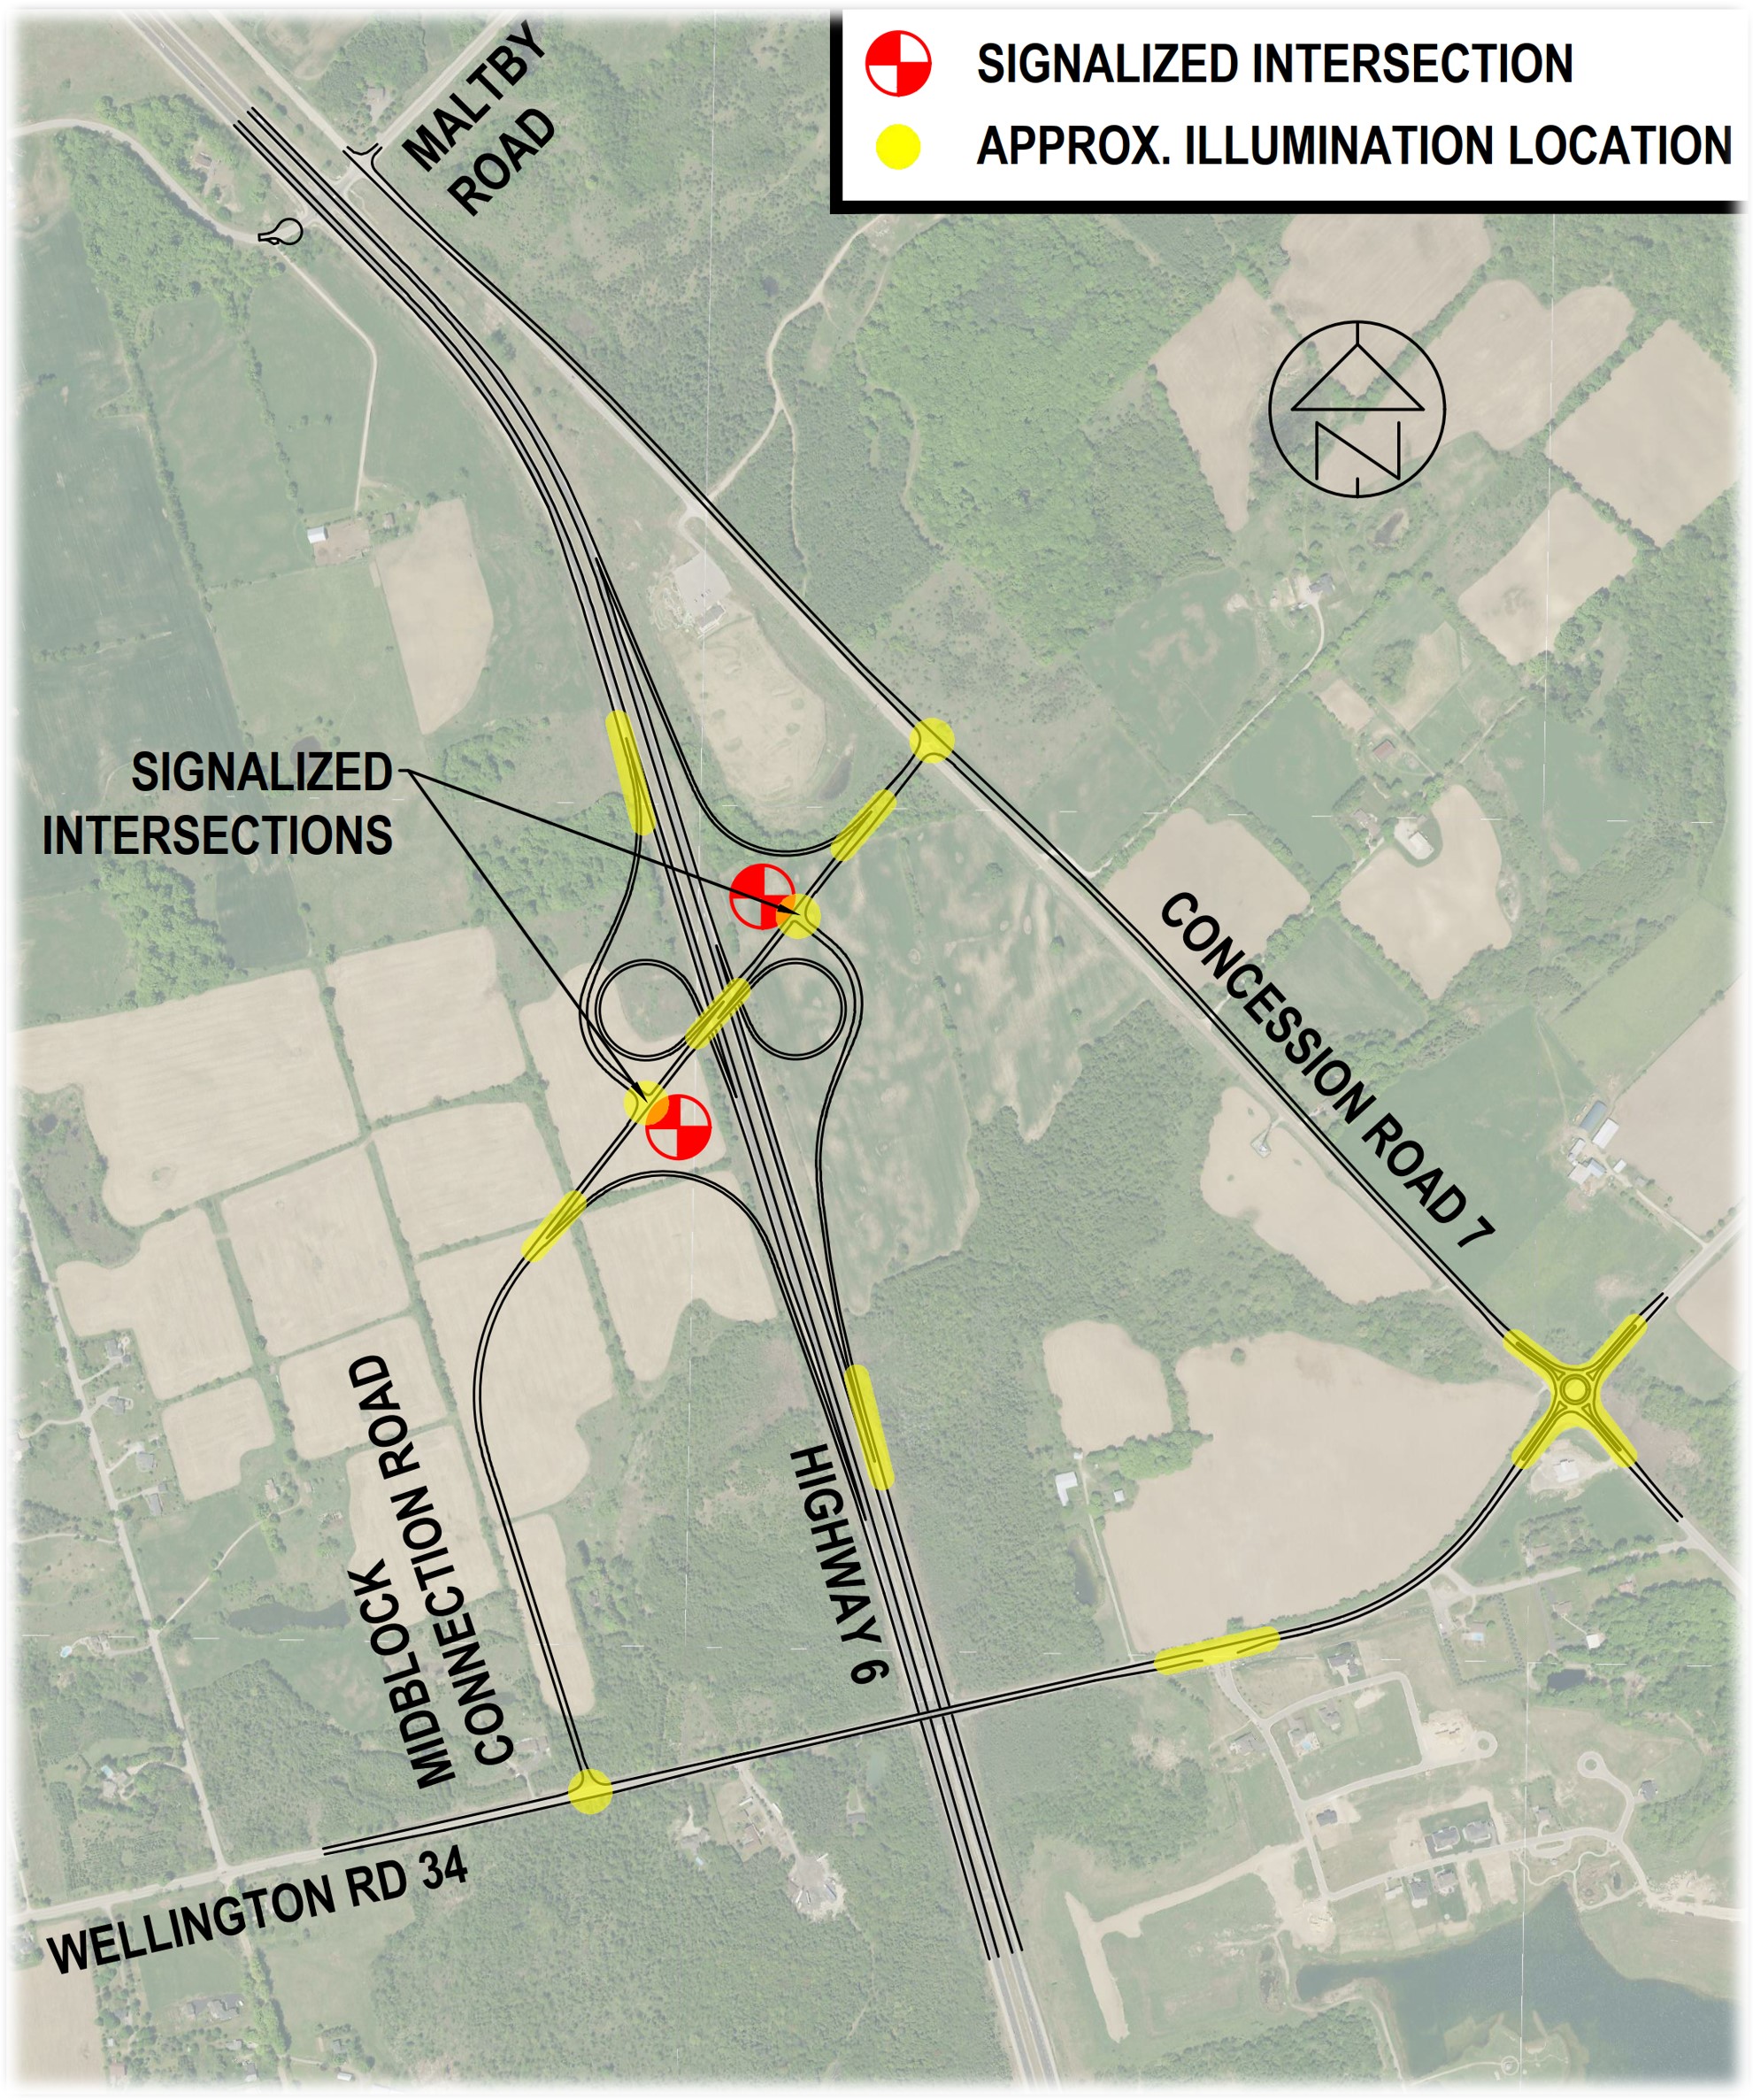 Aerial map depicting the signalized intersections and the approximate illumination locations within the Study Area